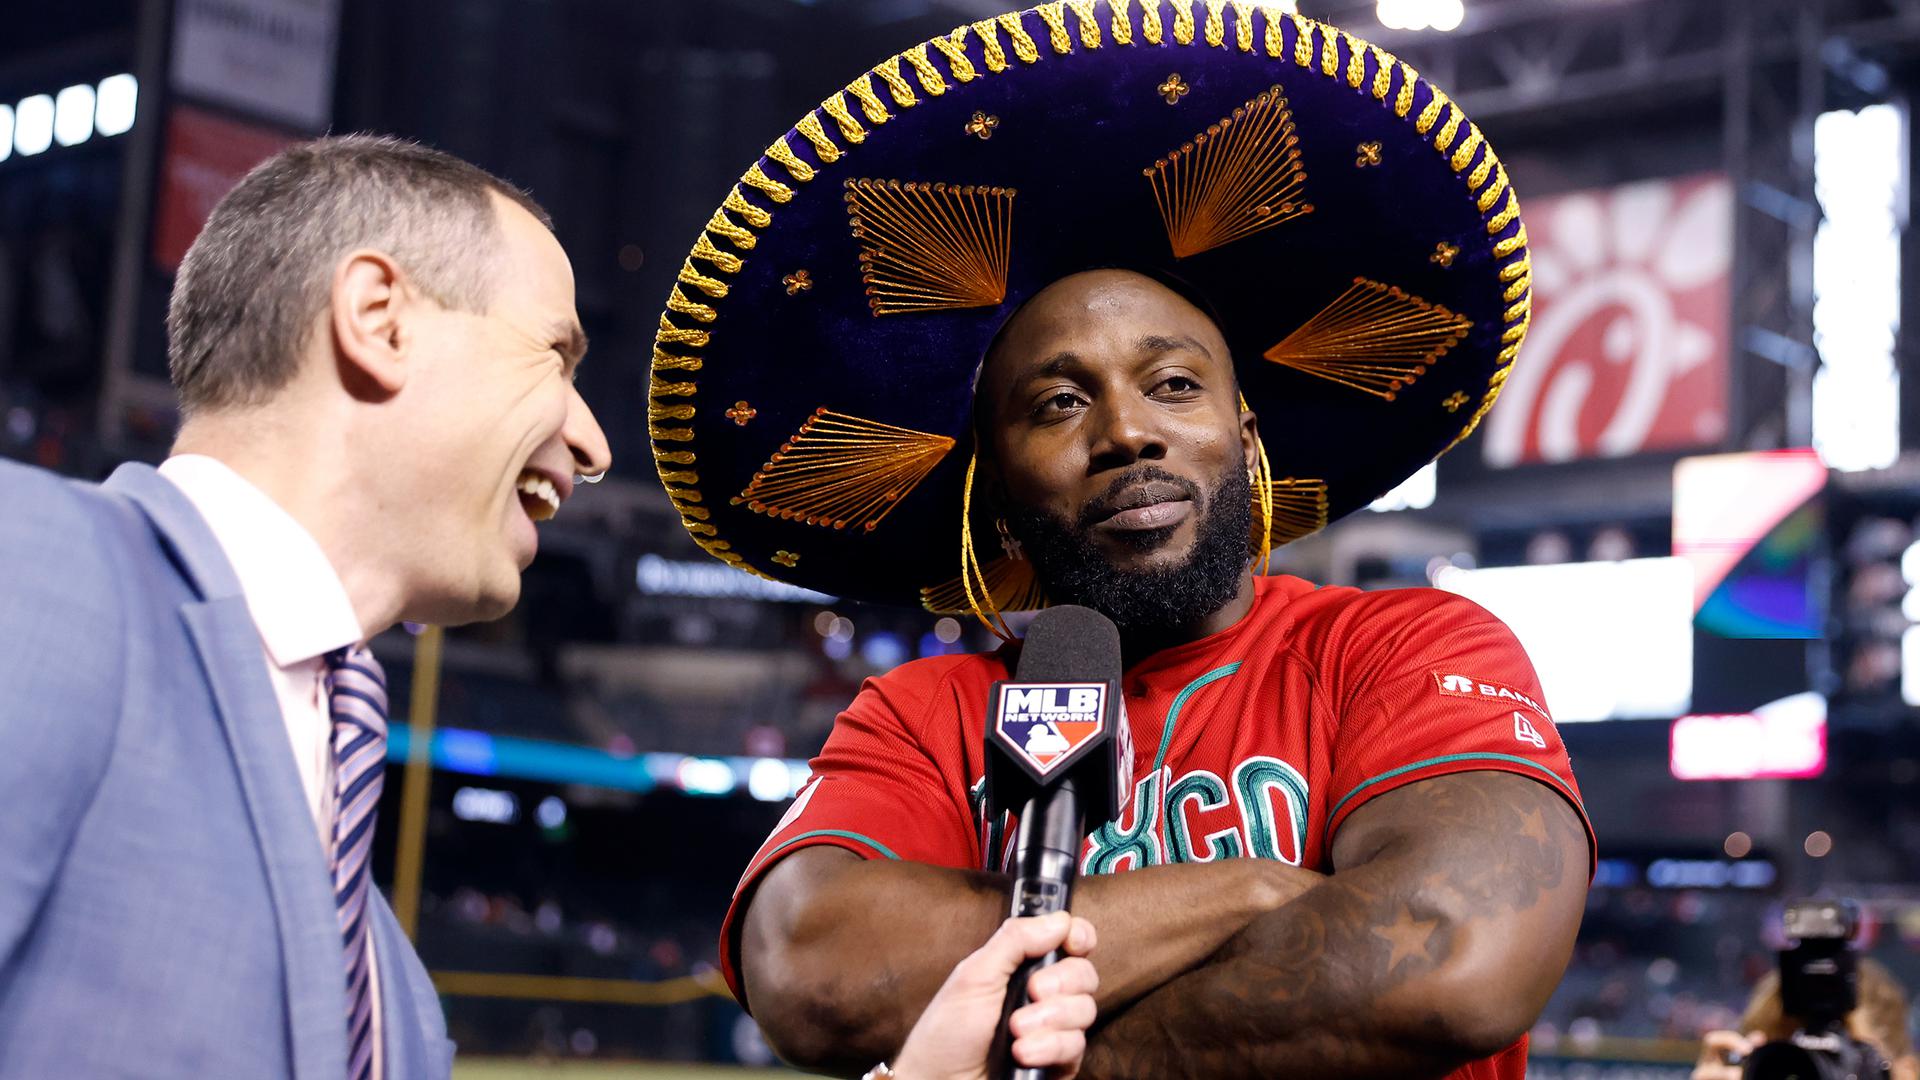 Randy Arozarena folds his arms while wearing a sombrero and being interviewed on TV